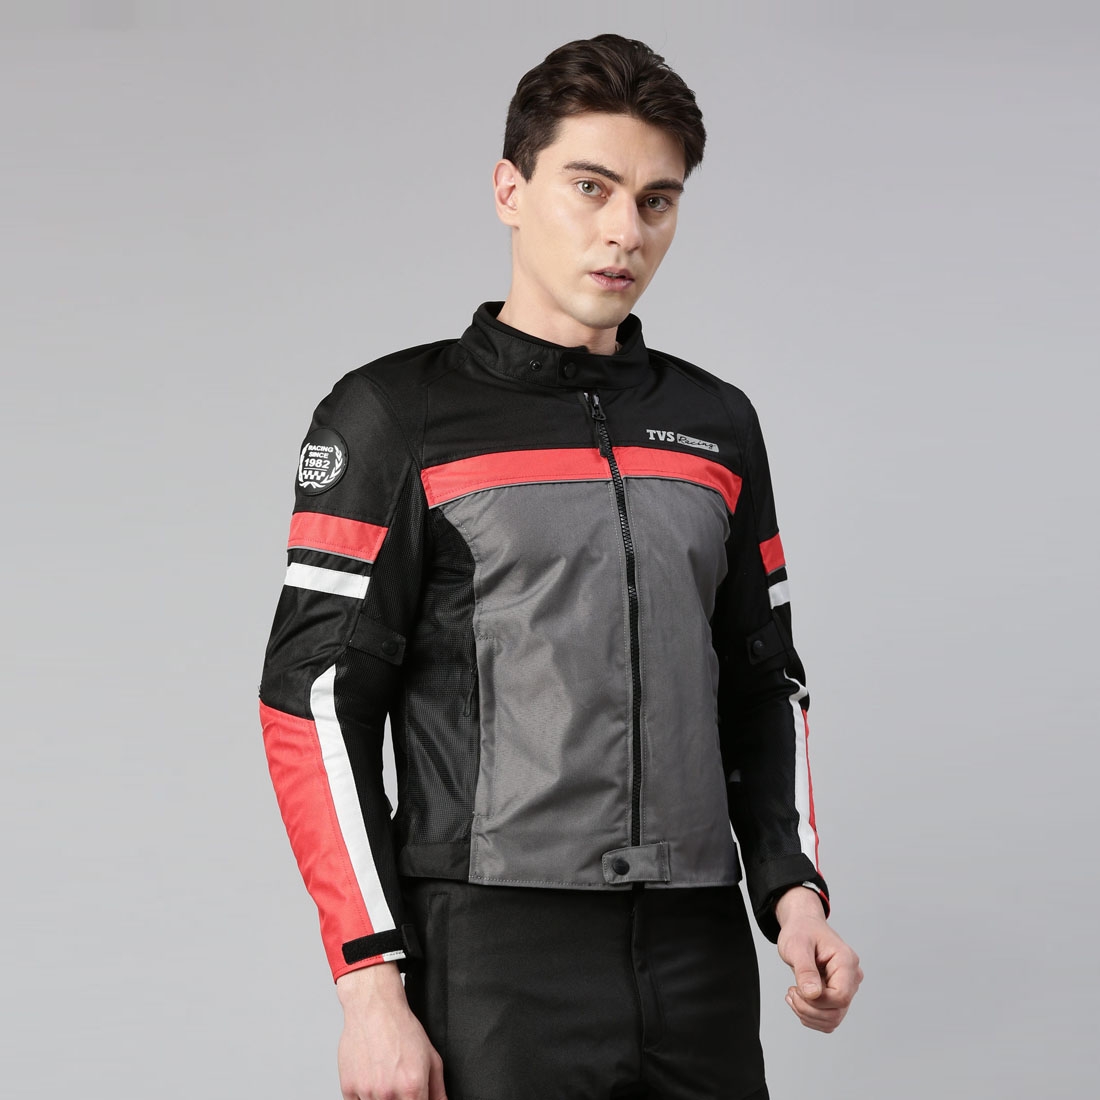 QziH6 q5l TVS Racing or Riding Jacket SL or Red and Black or Medium Size